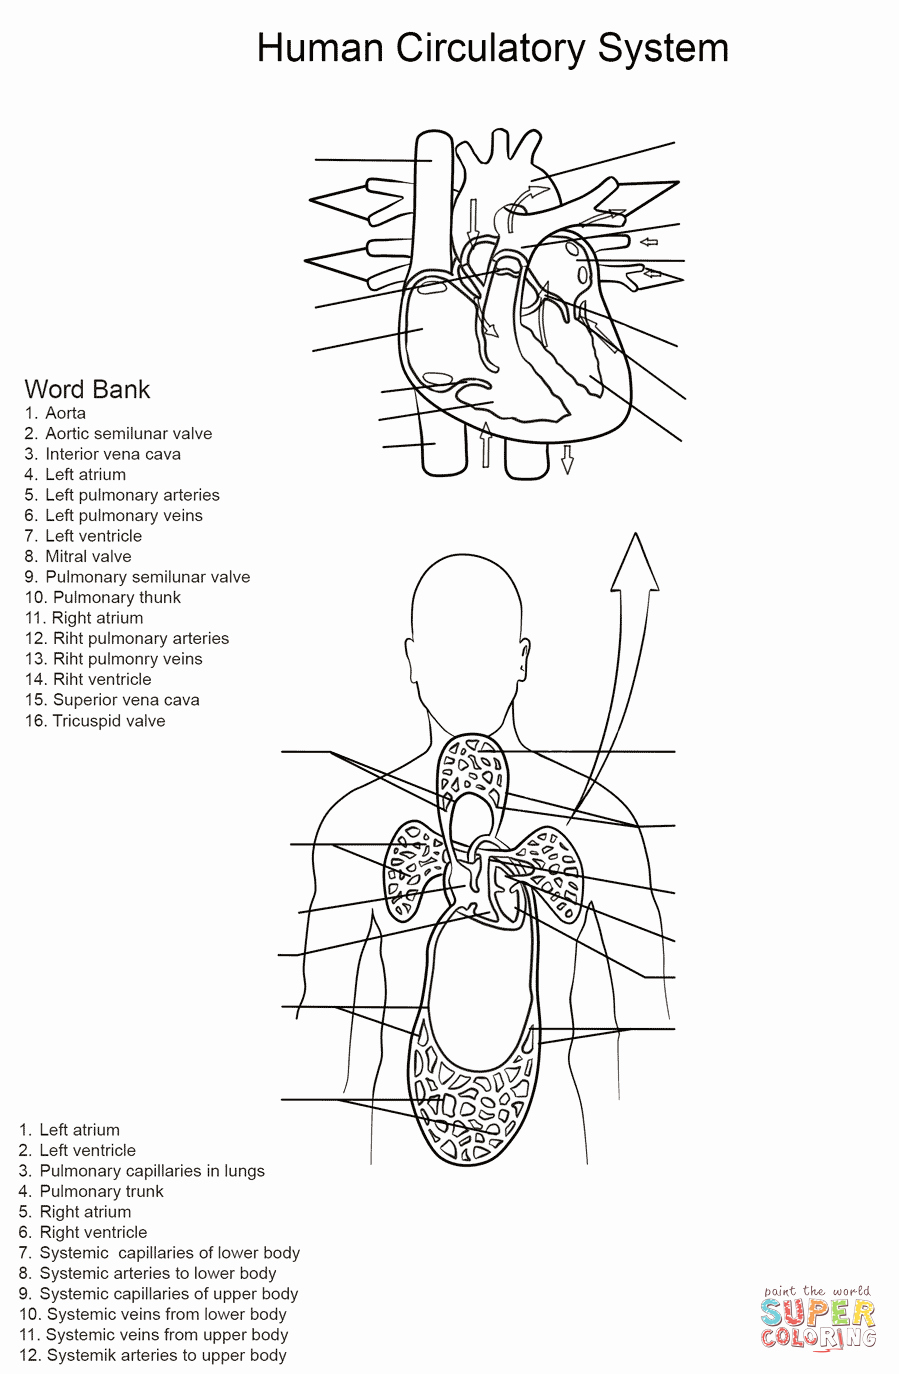 Circulatory System Worksheet Answers Unique Human Circulatory System Worksheet Coloring Page